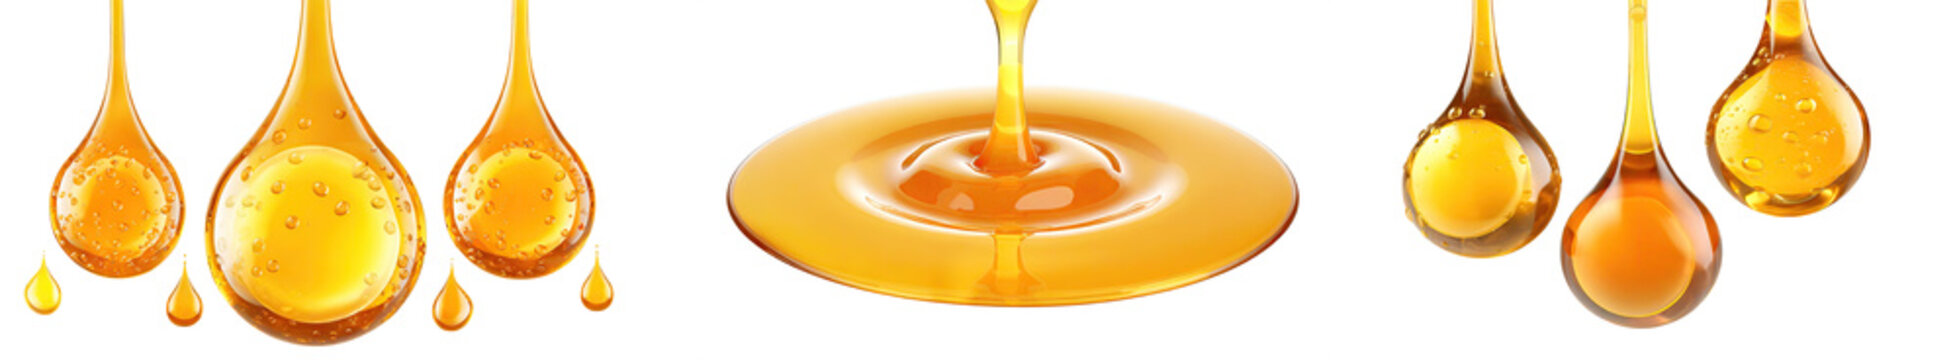 Collection of melting honey drops, ripple and pouring, isolated on a transparent background. PNG cutout or clipping path.